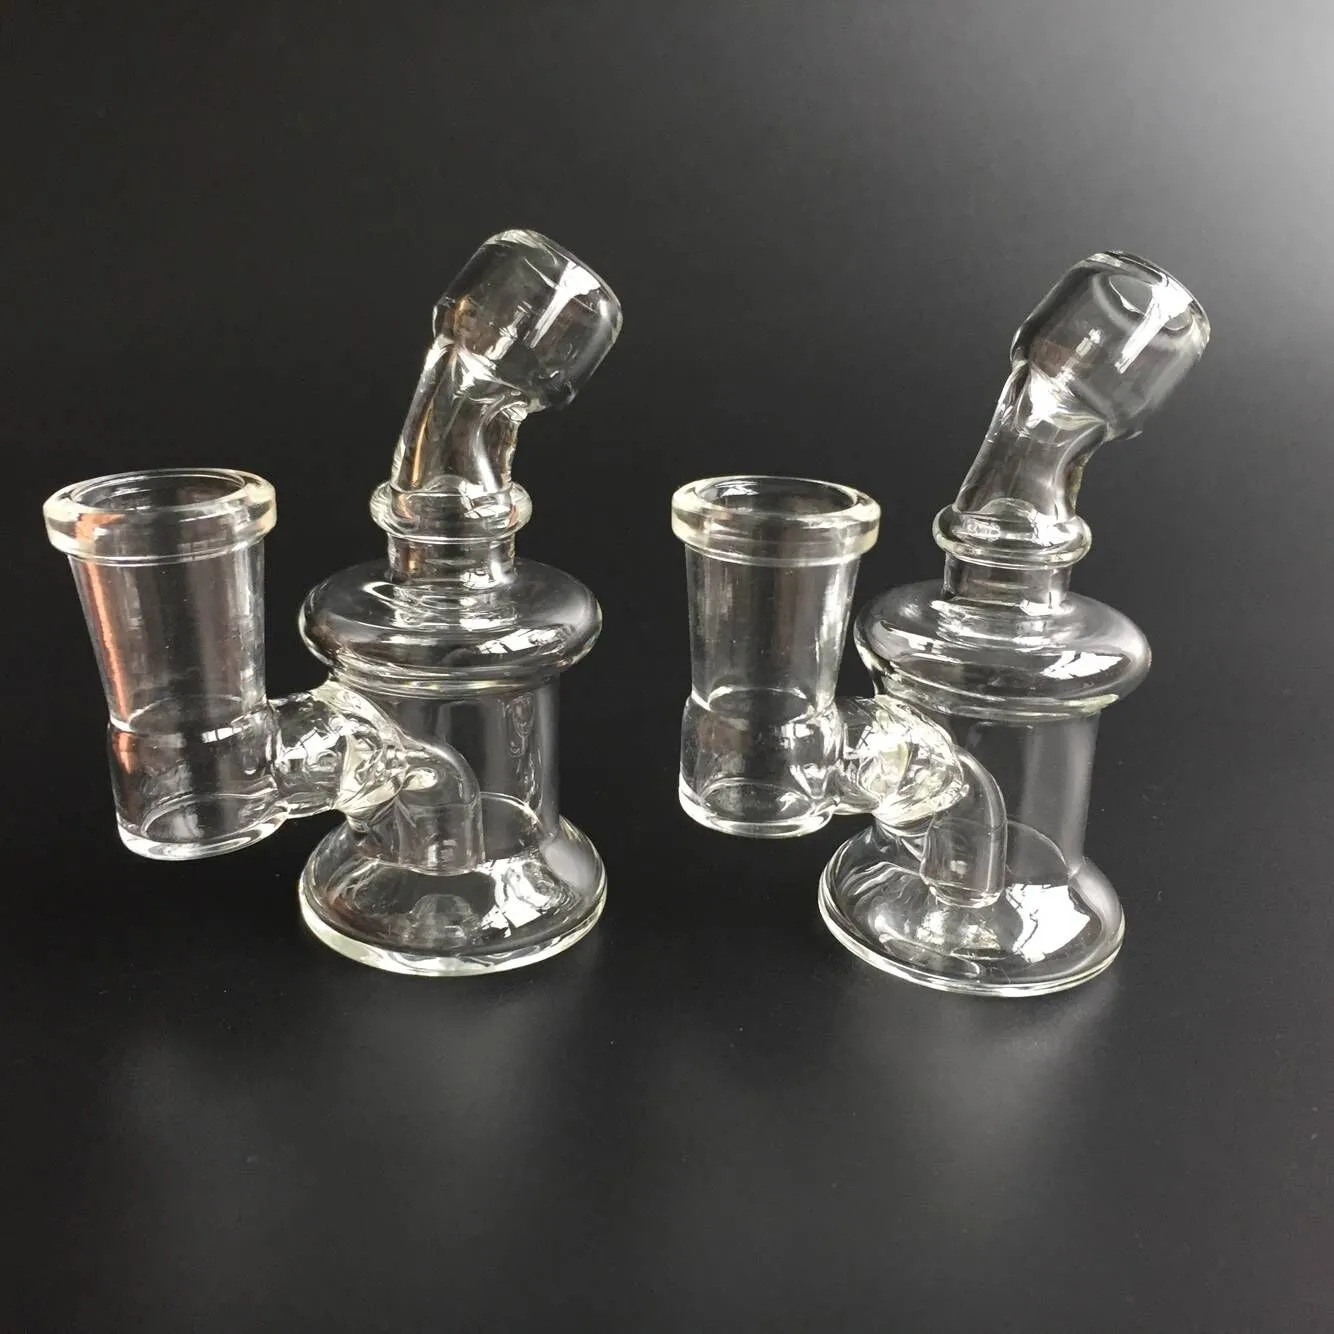 Nano Rig Mini Glass Bongs Rig Fab Egg Bongs Oil Rig Dabs Glass Red Oil Drips Heady Recycler 14mm joint